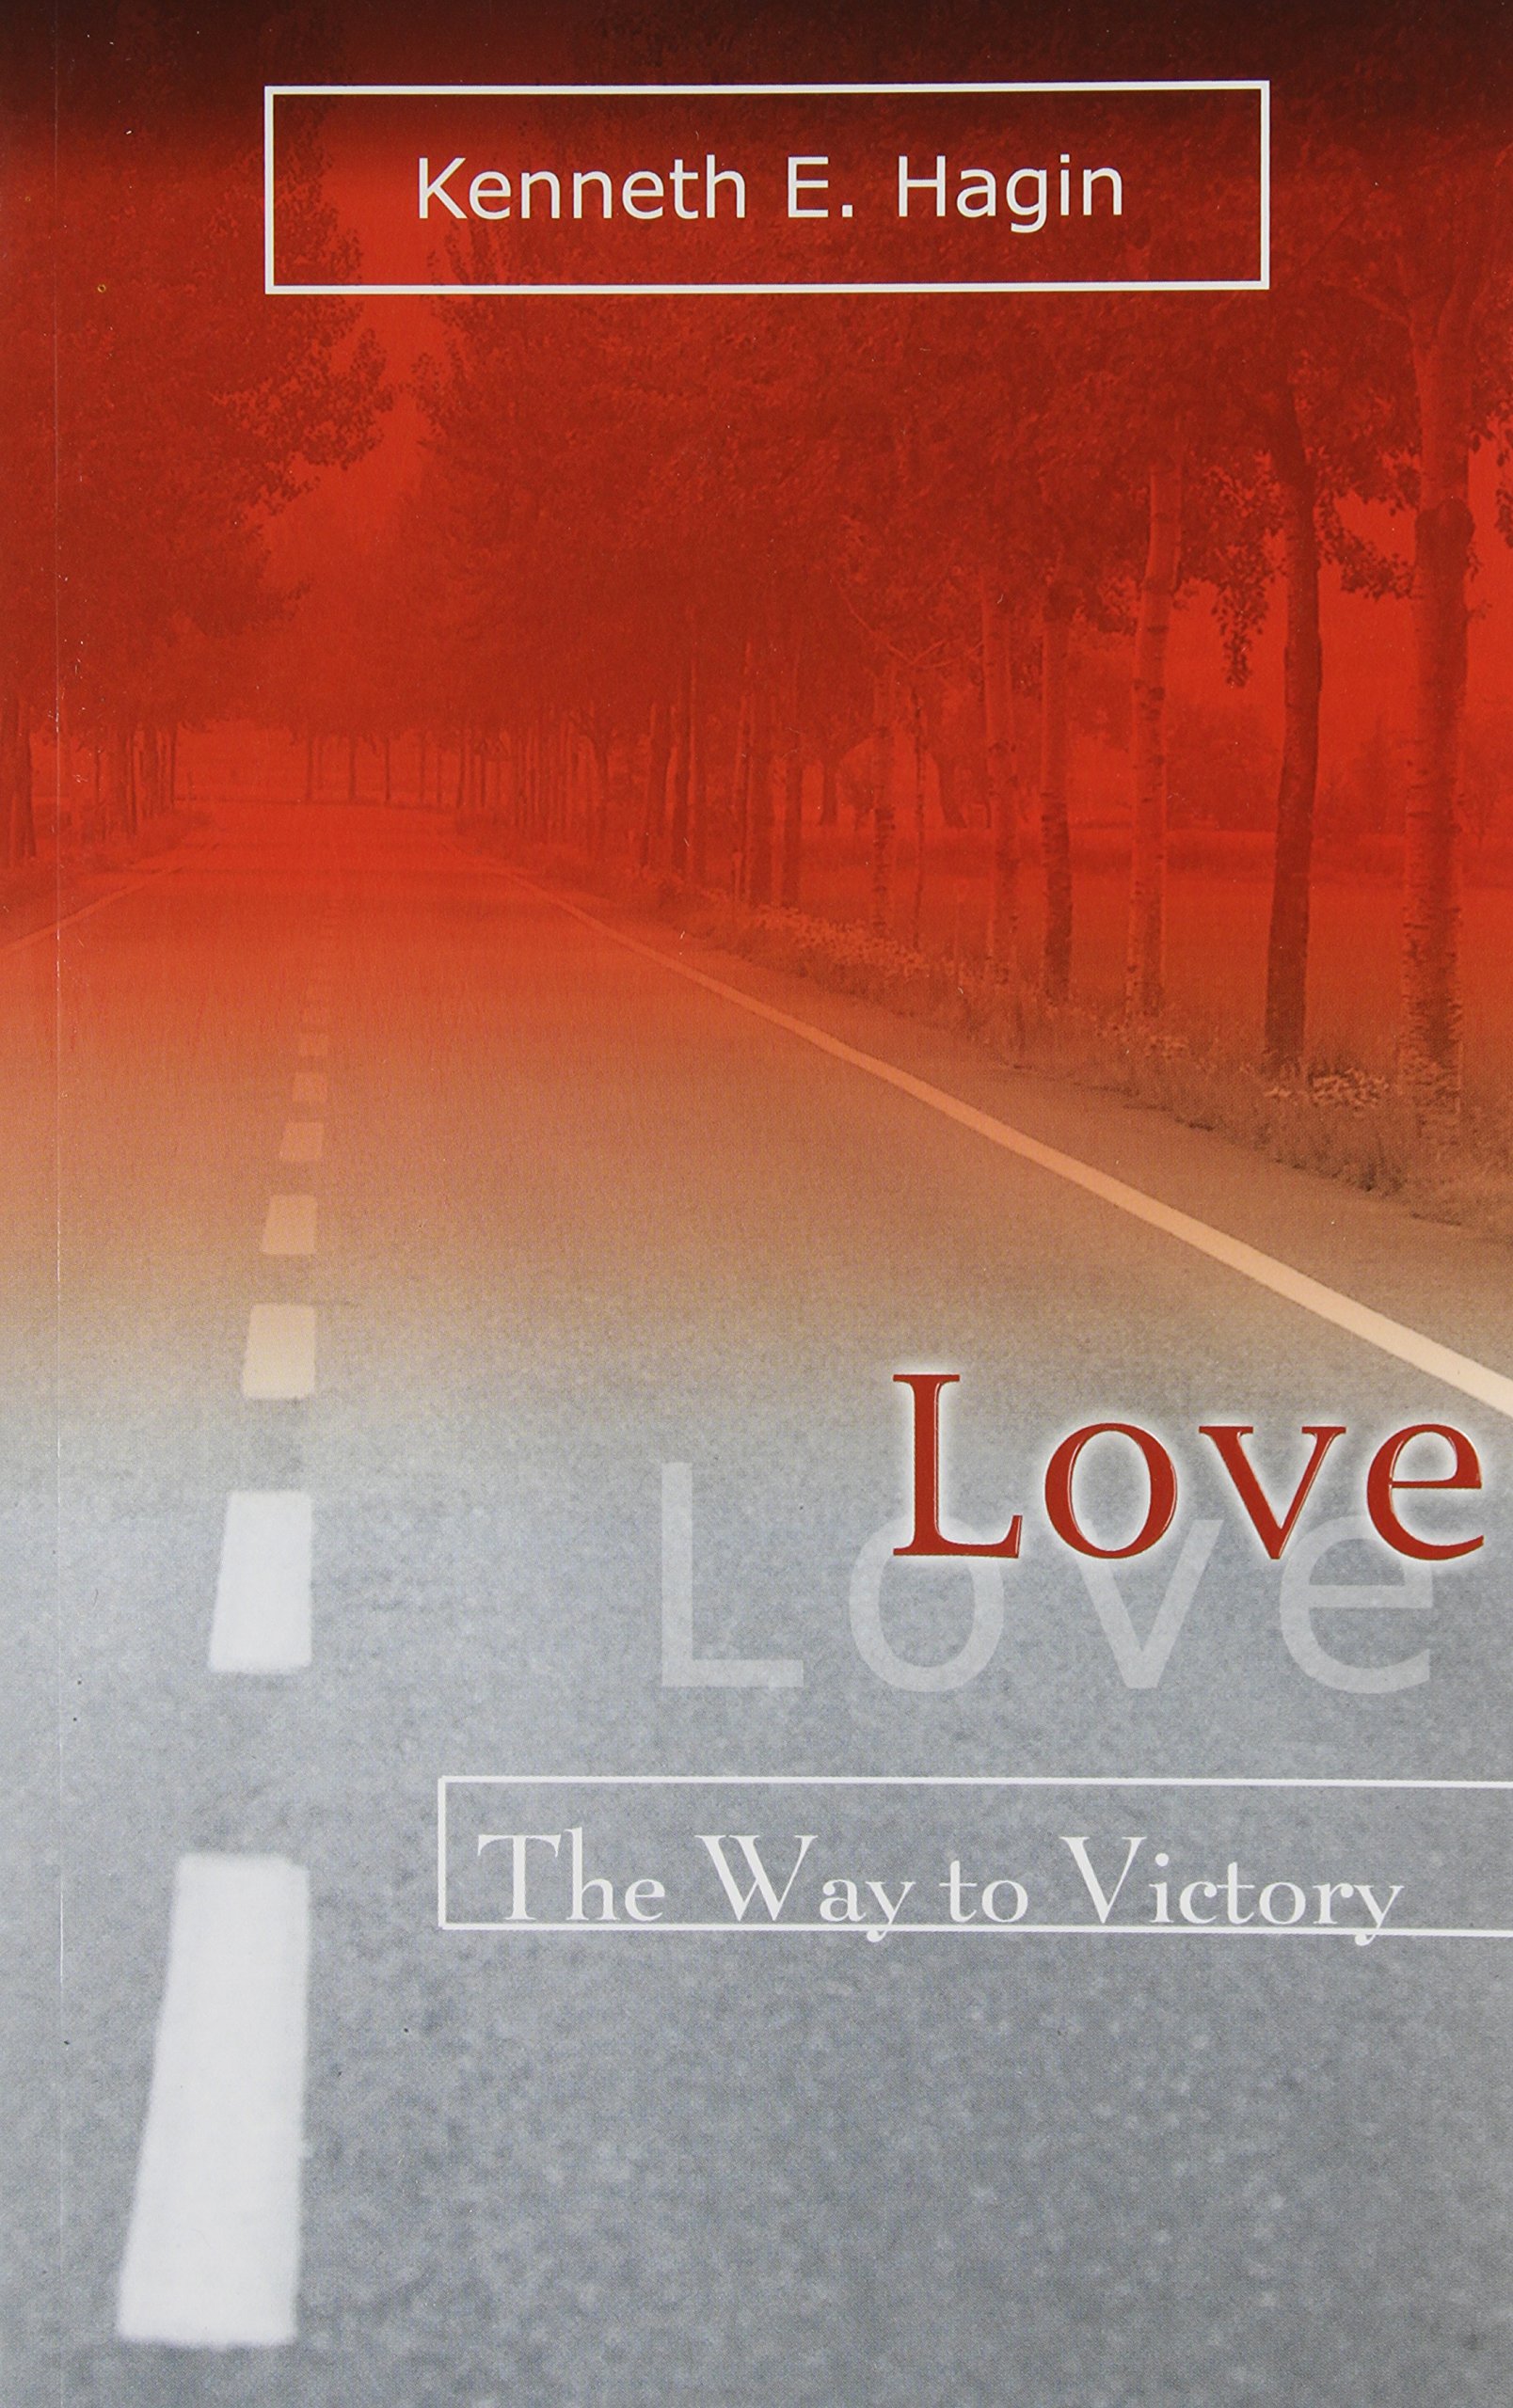 DOWNLOAD PDF: Love – The Way to Victory by Kenneth Hagin 13